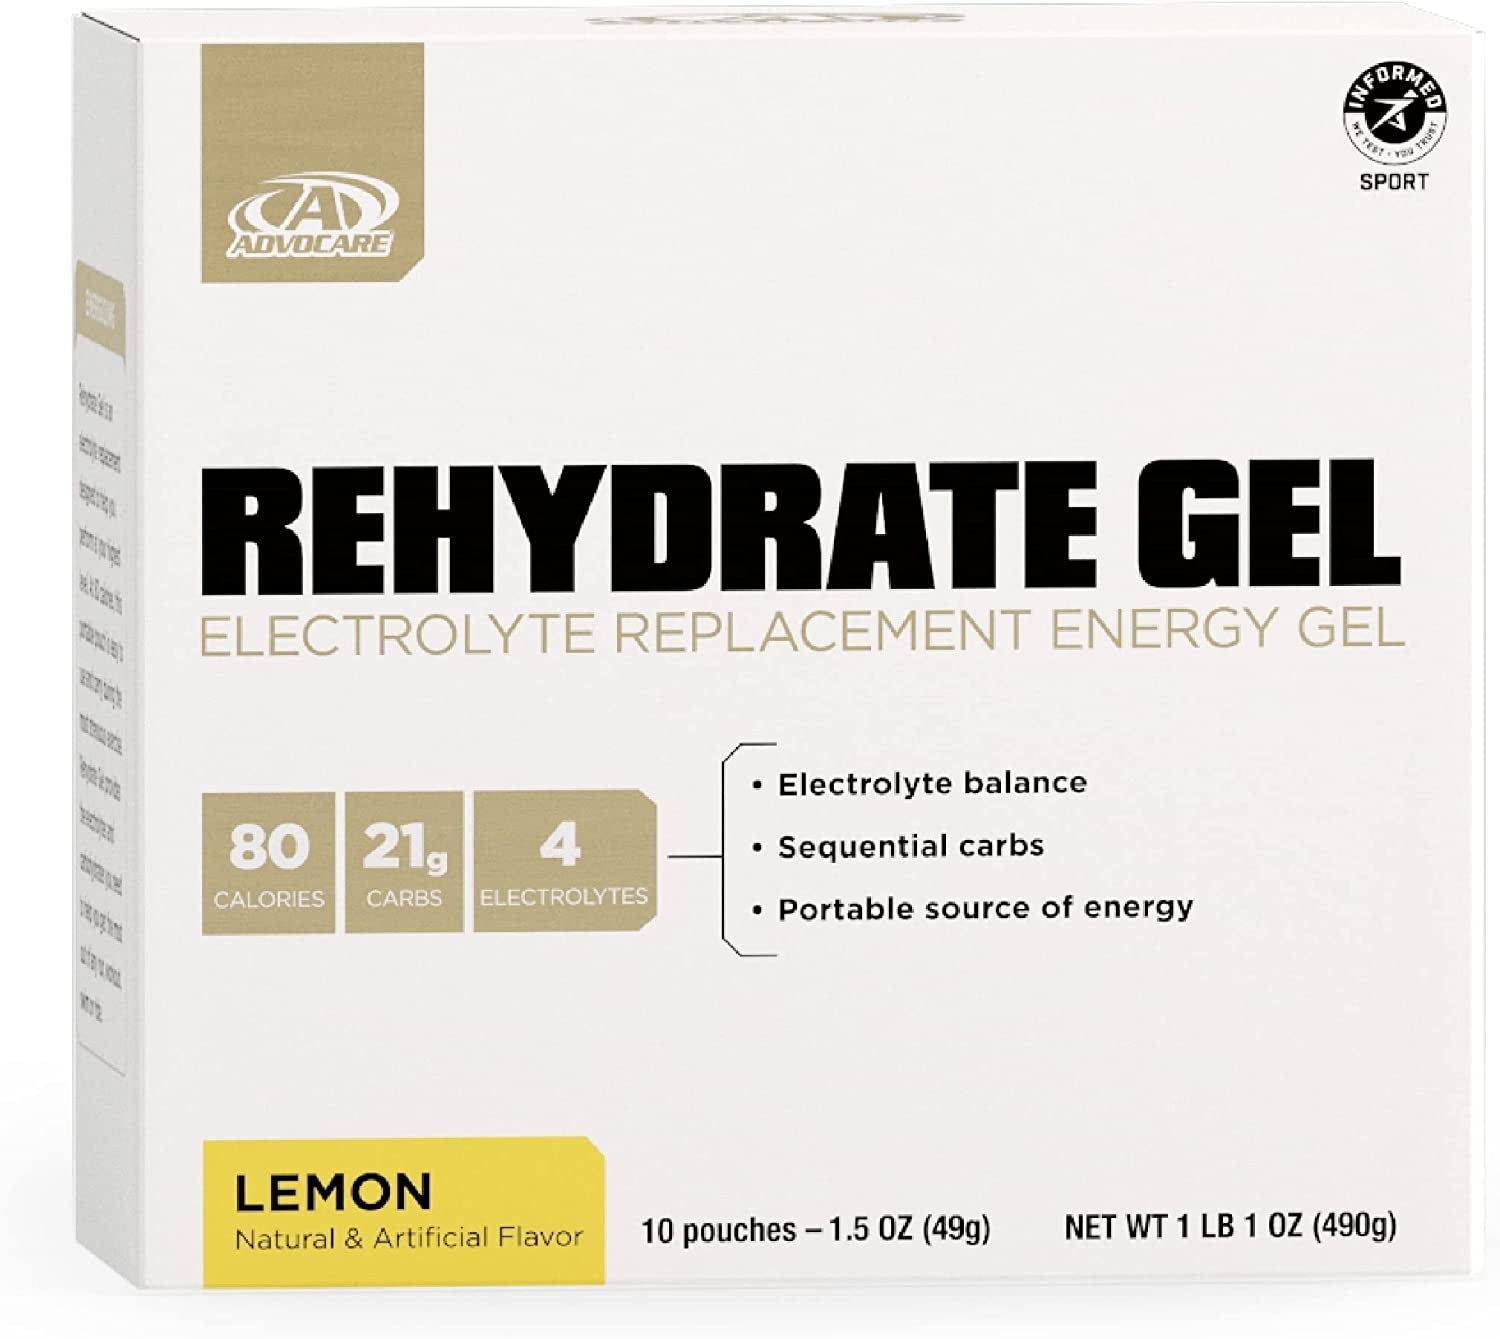 Advocare Rehydrate Gel - Electrolyte Energy Gel - Sports Gel for Hydration - Electrolyte Gels for Runners & Athletes - Workout Electrolytes for Pre & Post Workout - Lemon Flavor - 10 Pouches